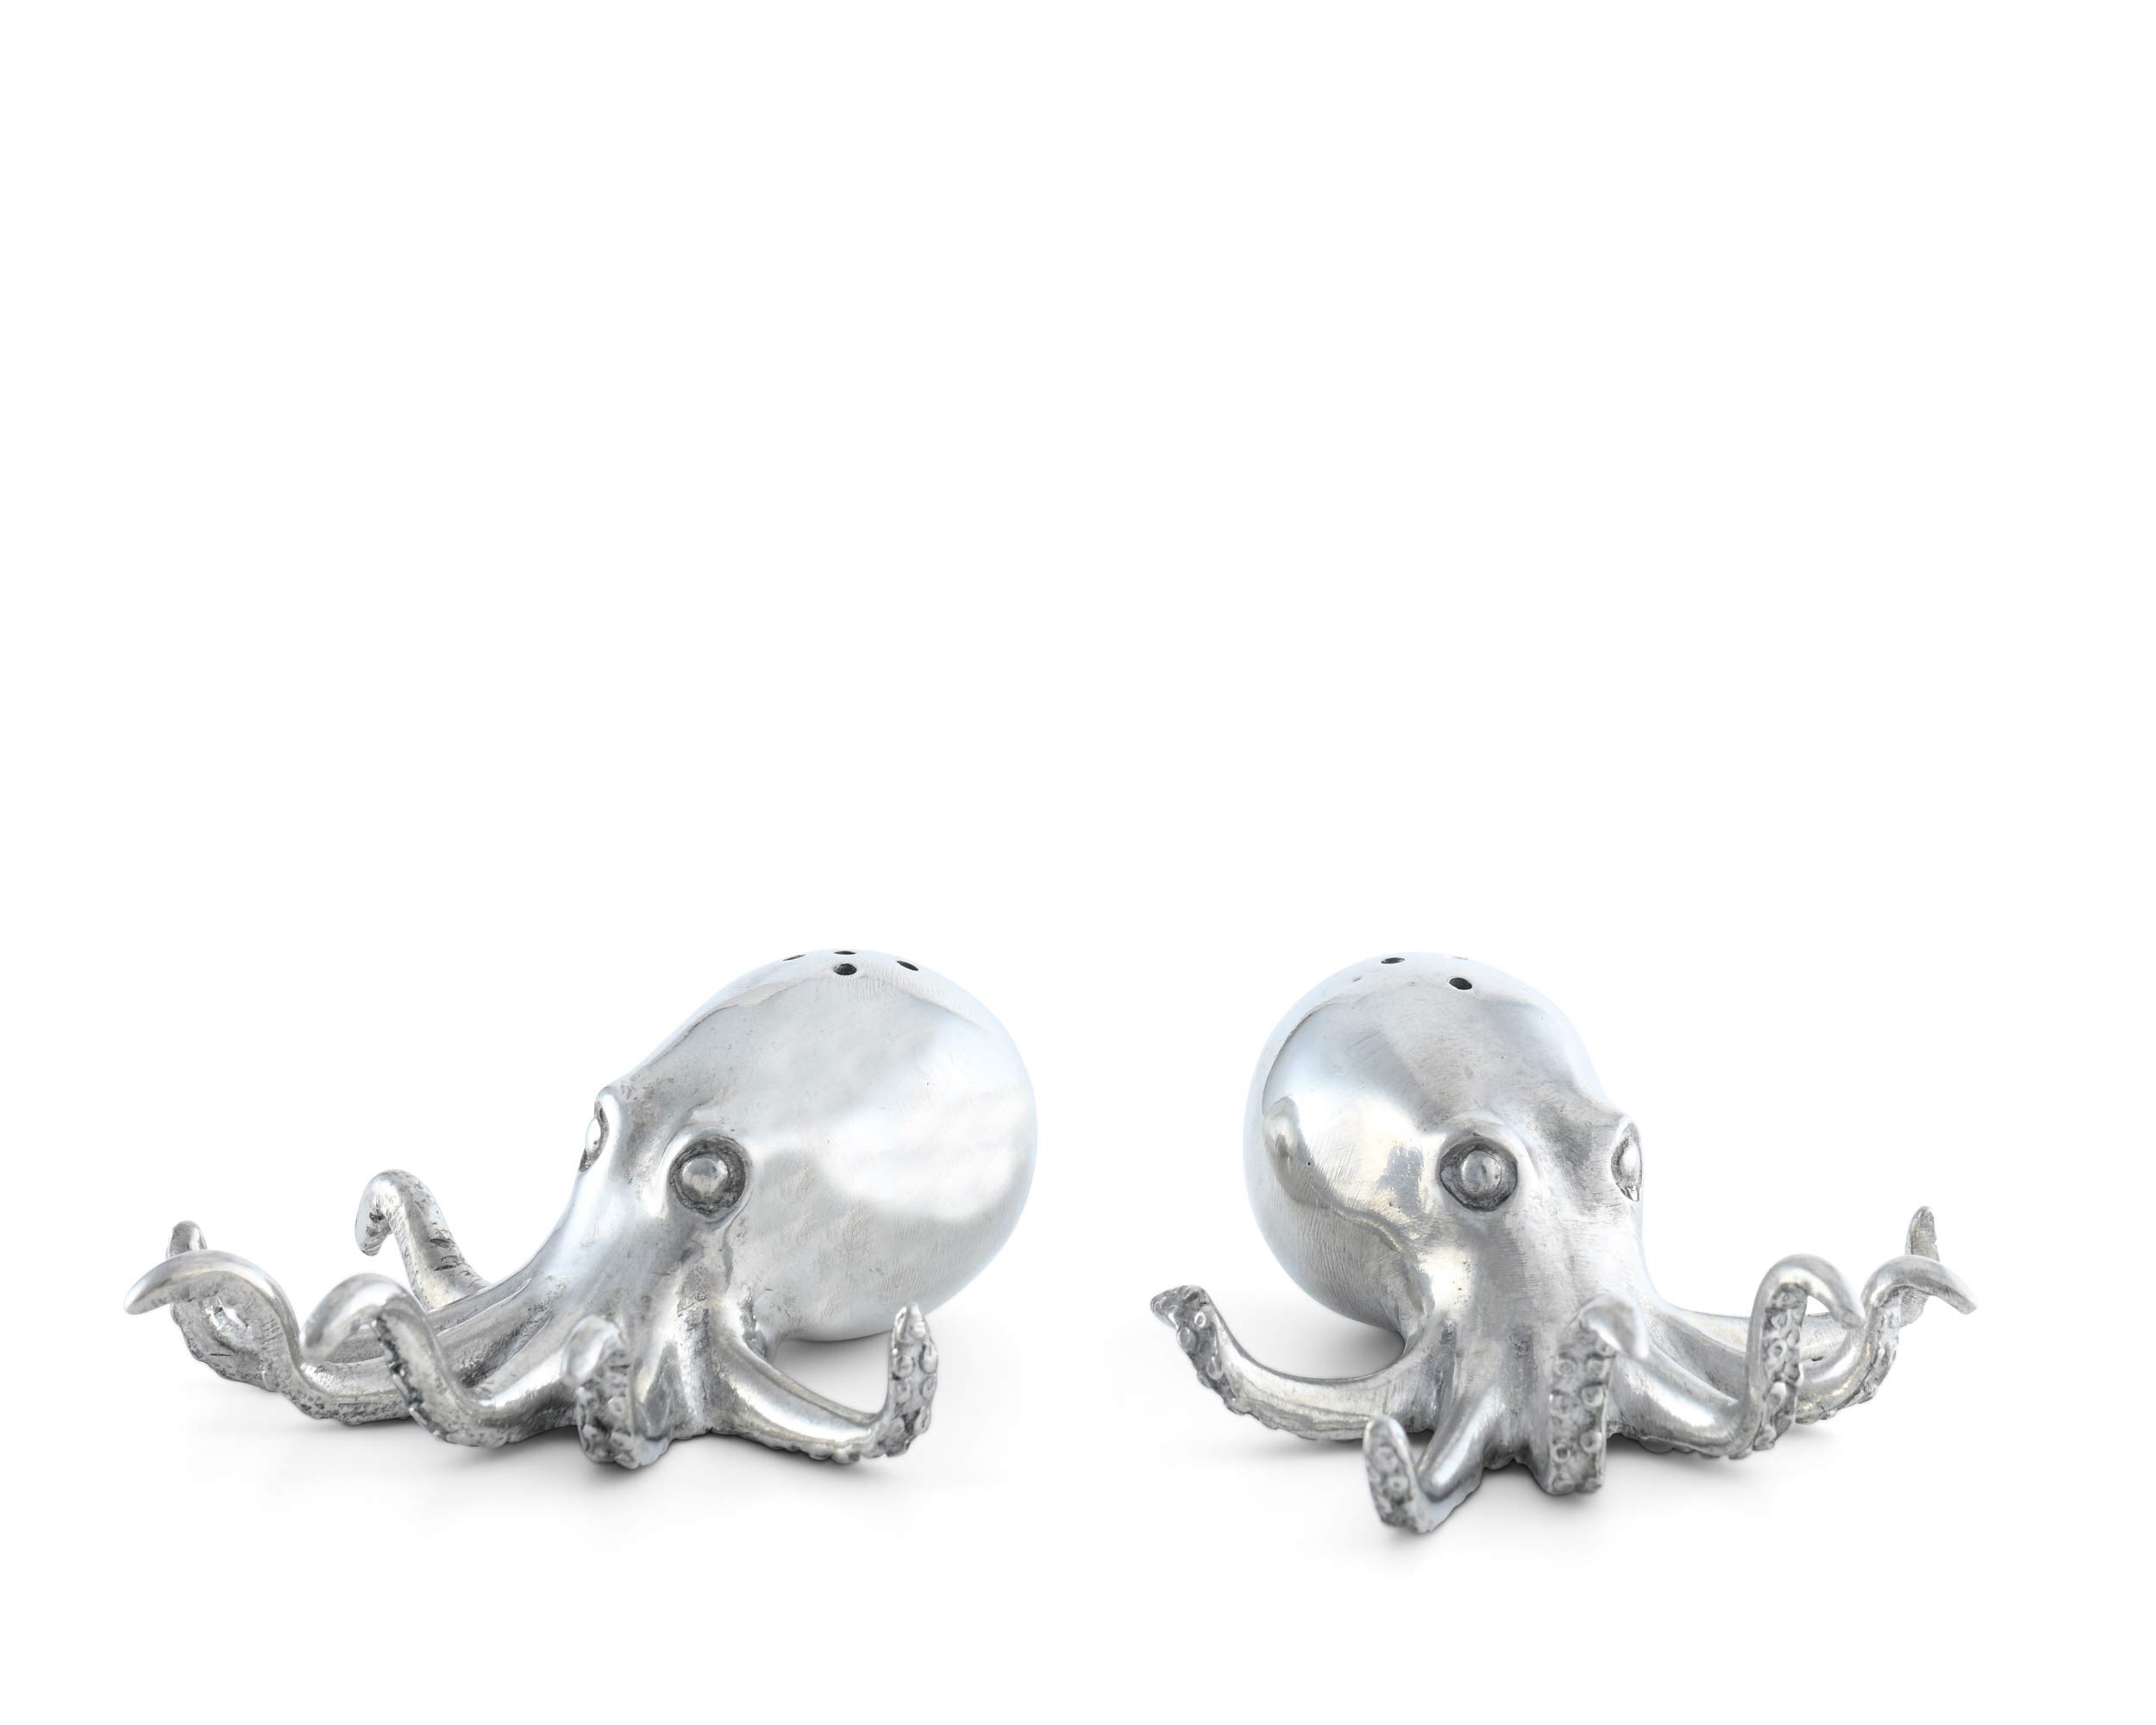 Vagabond House Pewter Octopus Salt and Pepper Shaker Set 3 inch Long x 1.5 inch Tall